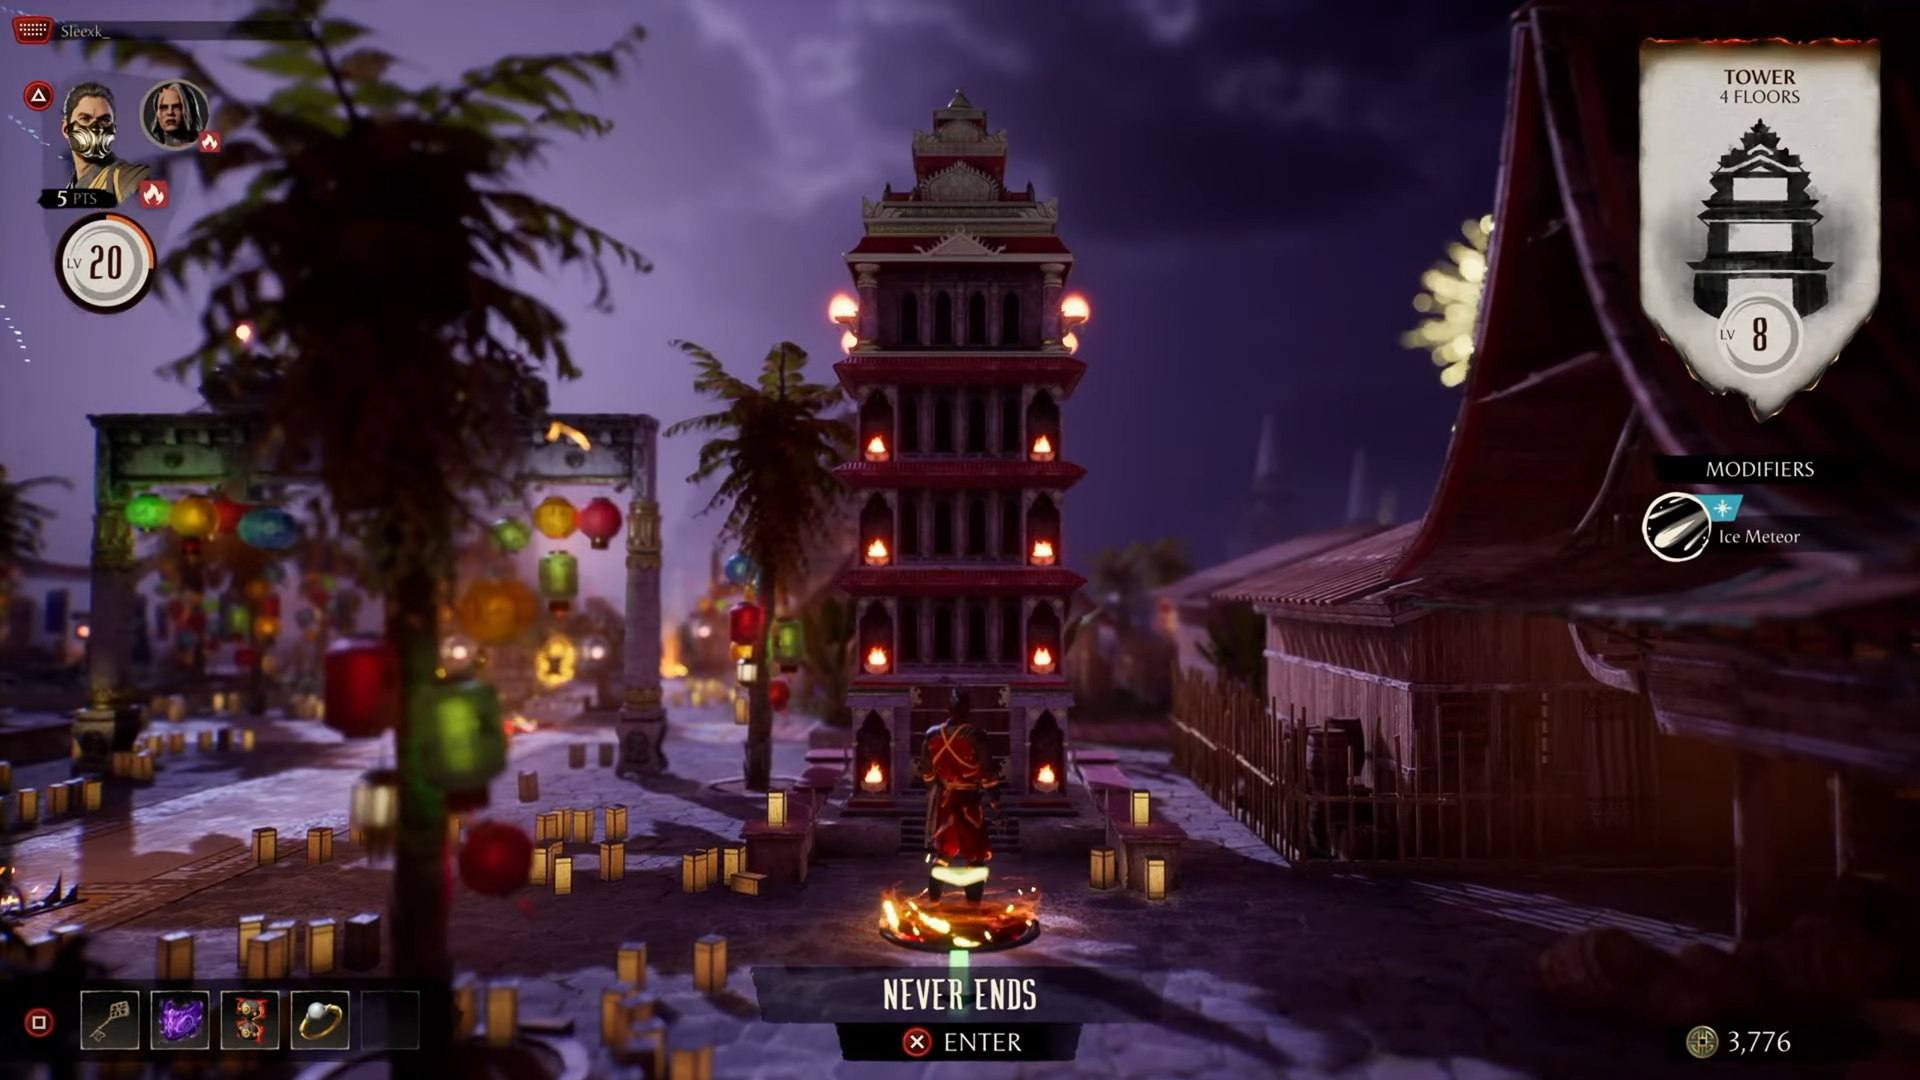 A screenshot of the Never Ends Tower in Mortal Kombat 1 Invasion Mode. 